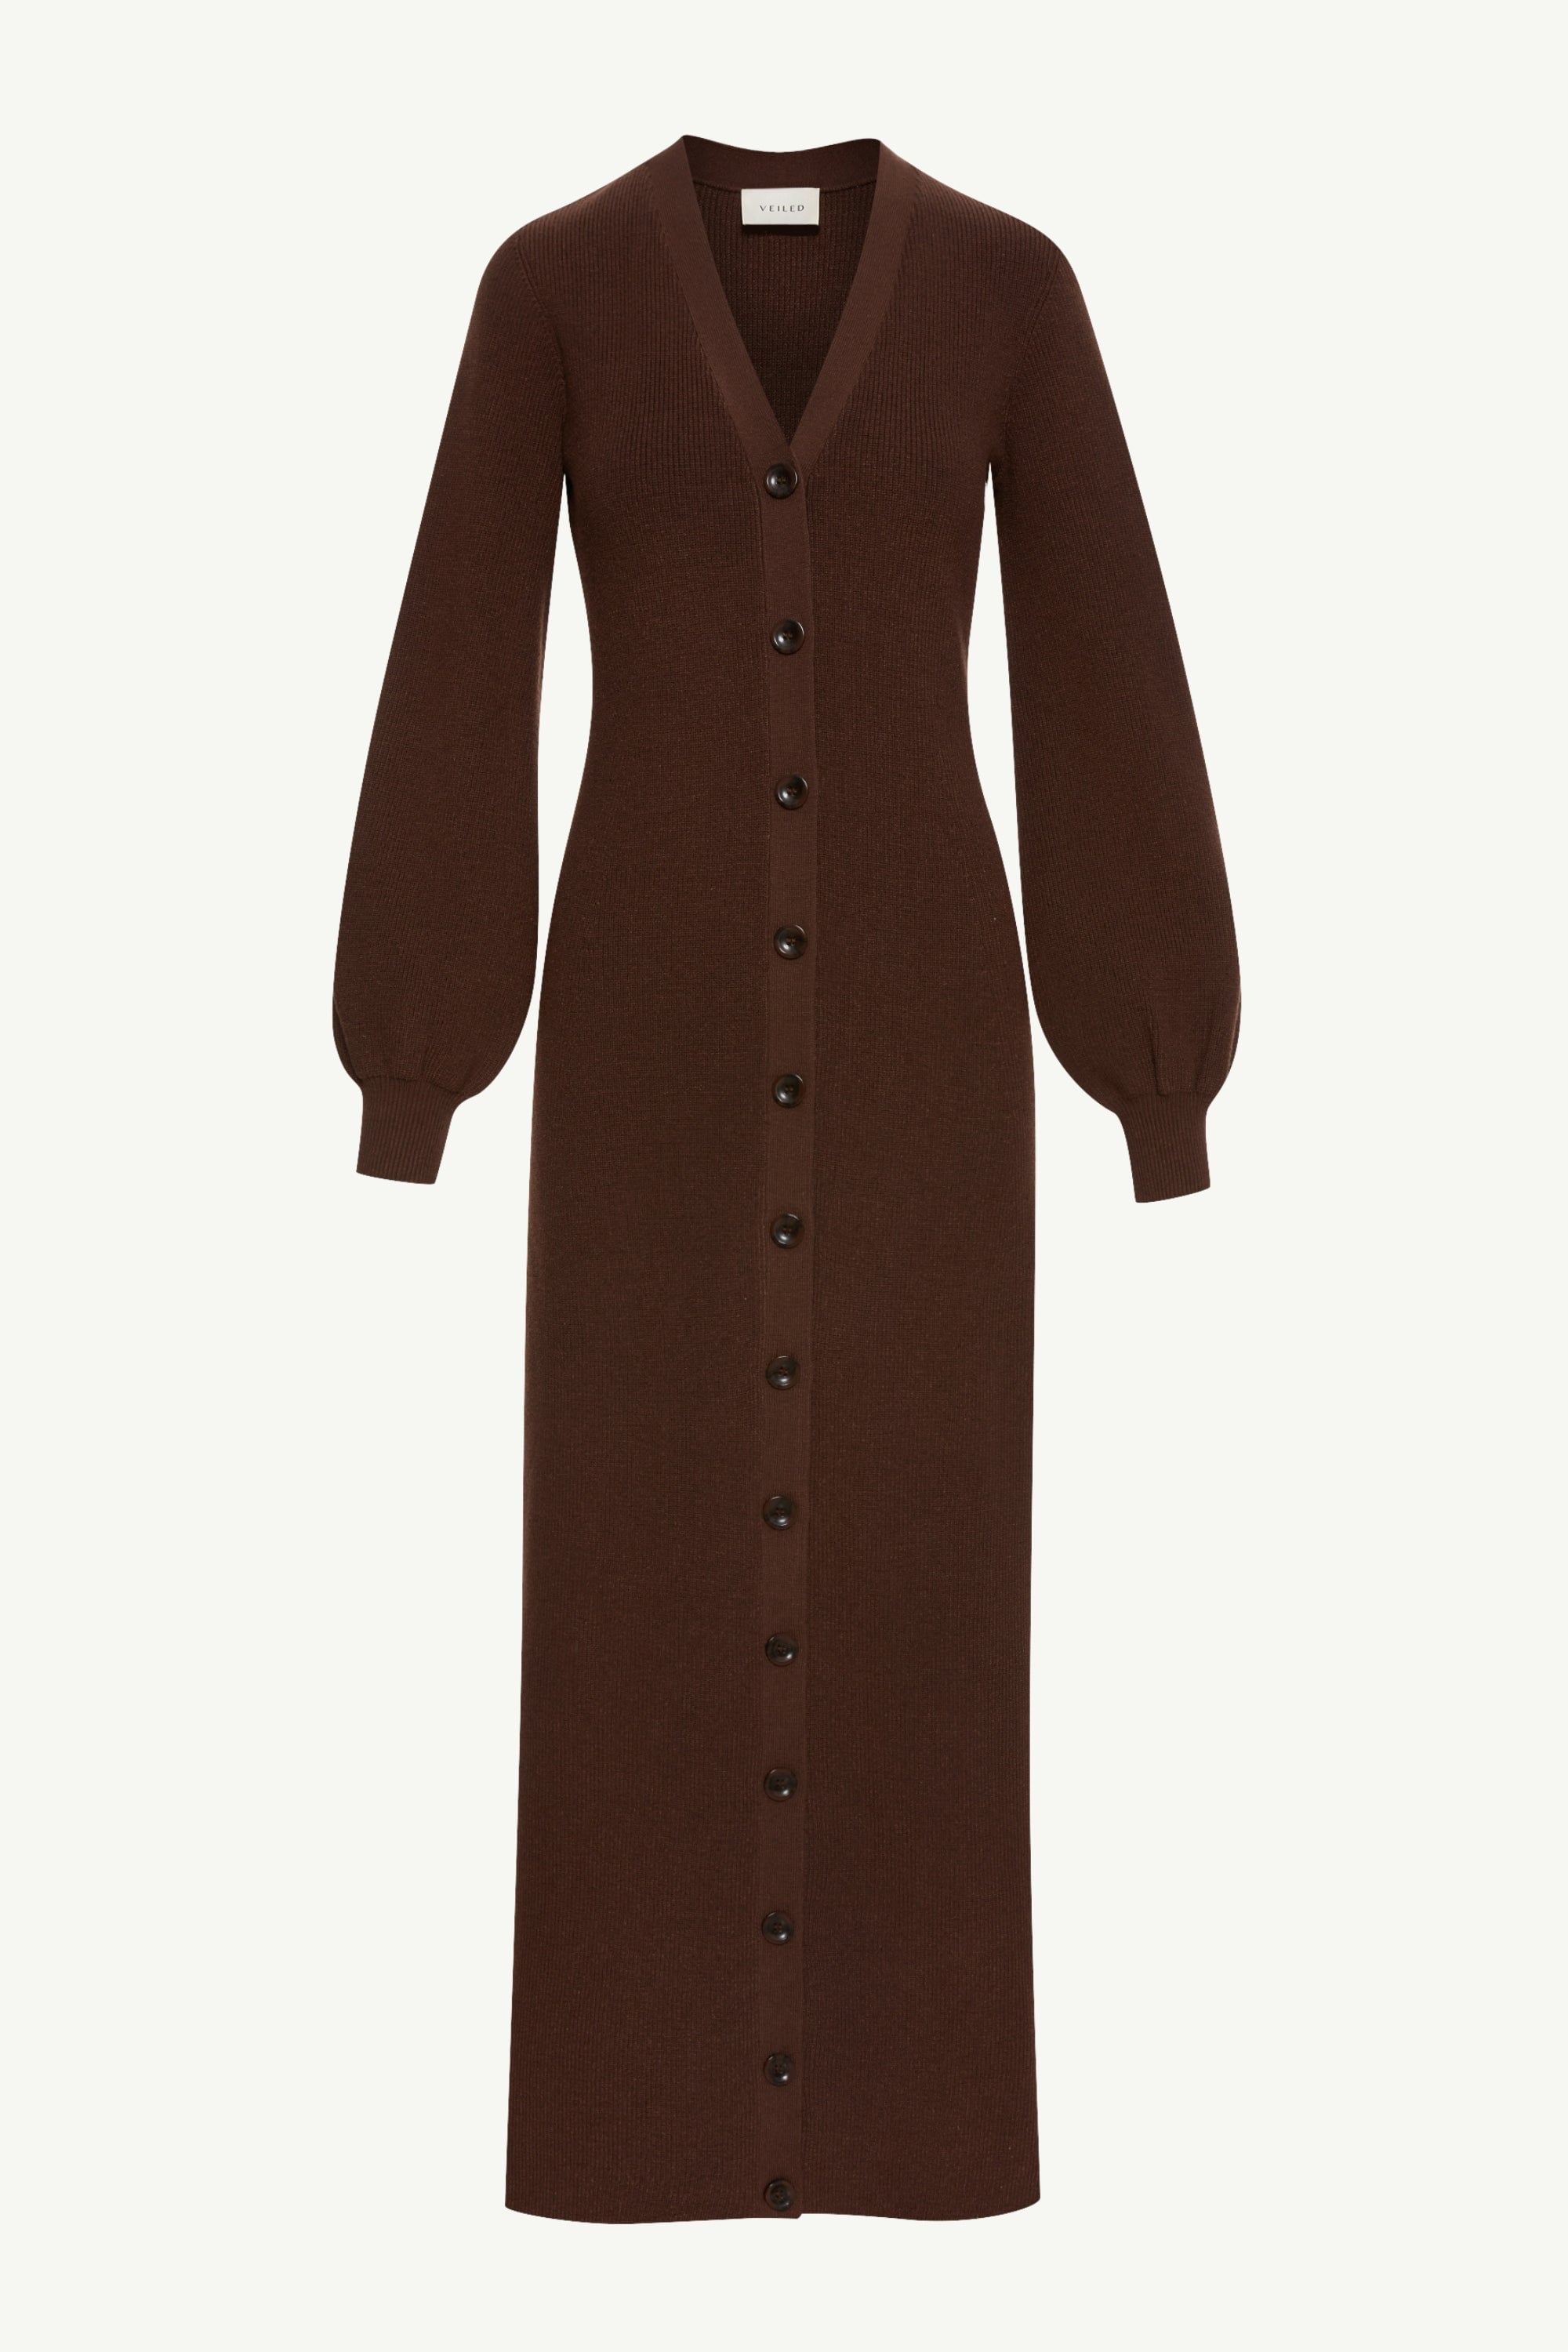 UHUYA My Recent Order Placed by Me Women'S Maxi Cardigan Shirt